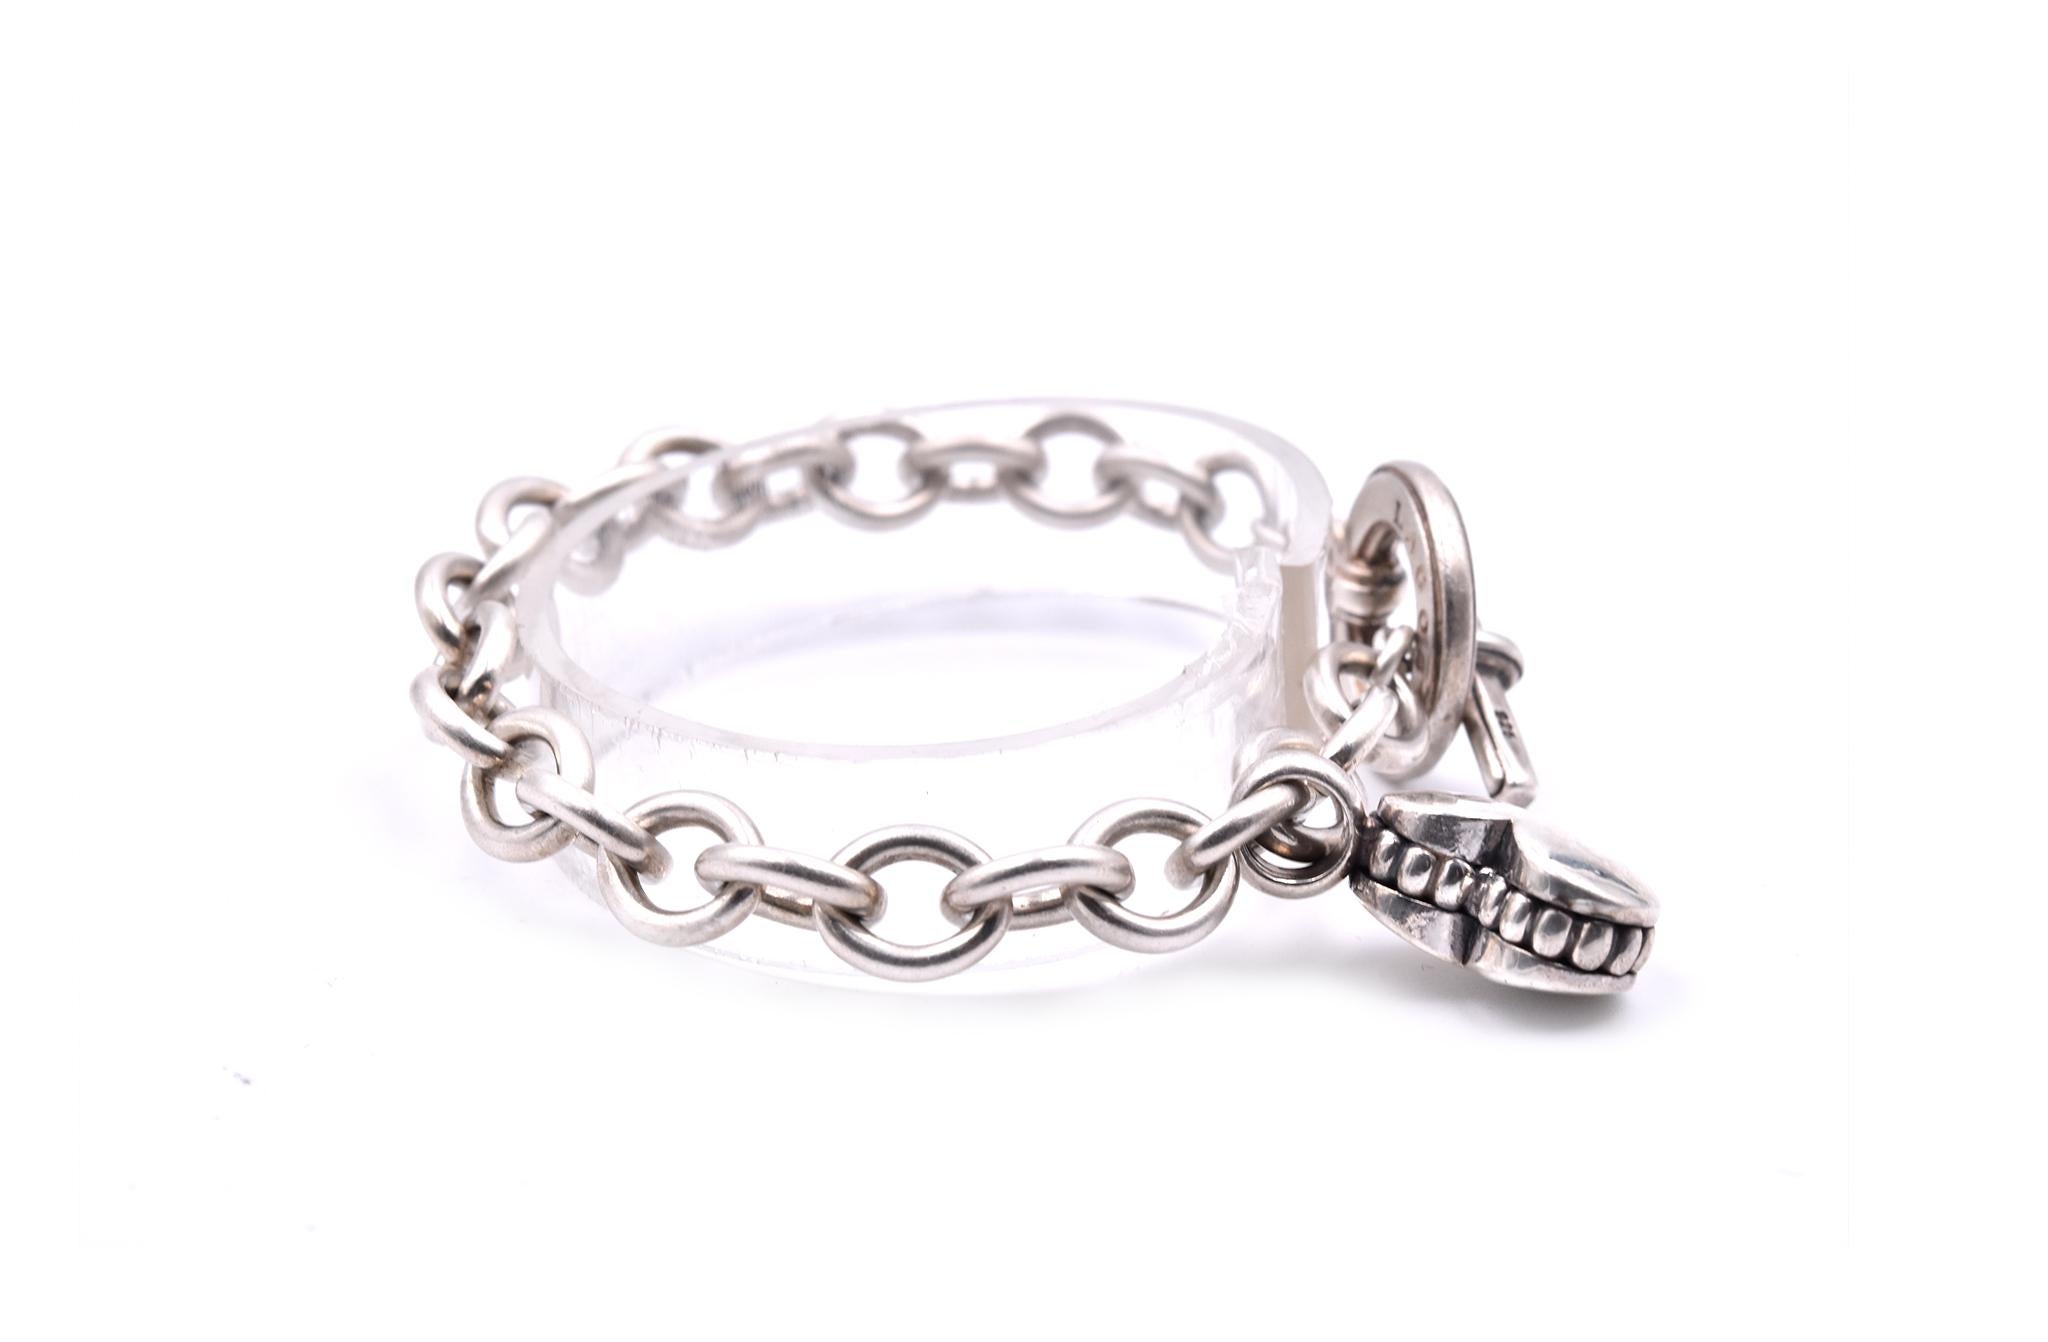 Designer: Lagos
Material: sterling silver
Dimensions: bracelet is 7”-inch
Weight: 32.24 grams
